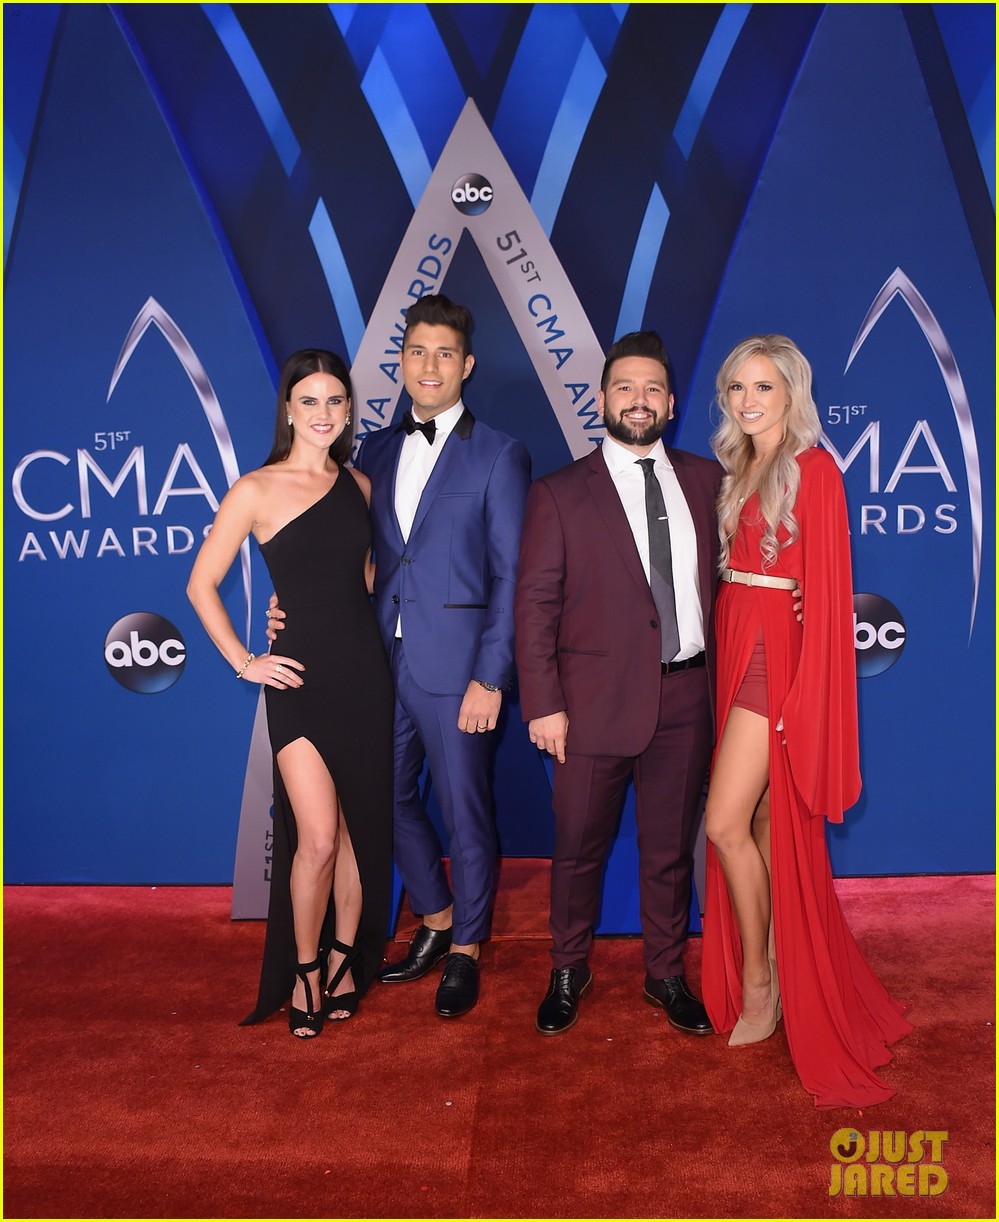 lauren alaina and dan and shay hit cma awards 2017 red carpet before performance 02